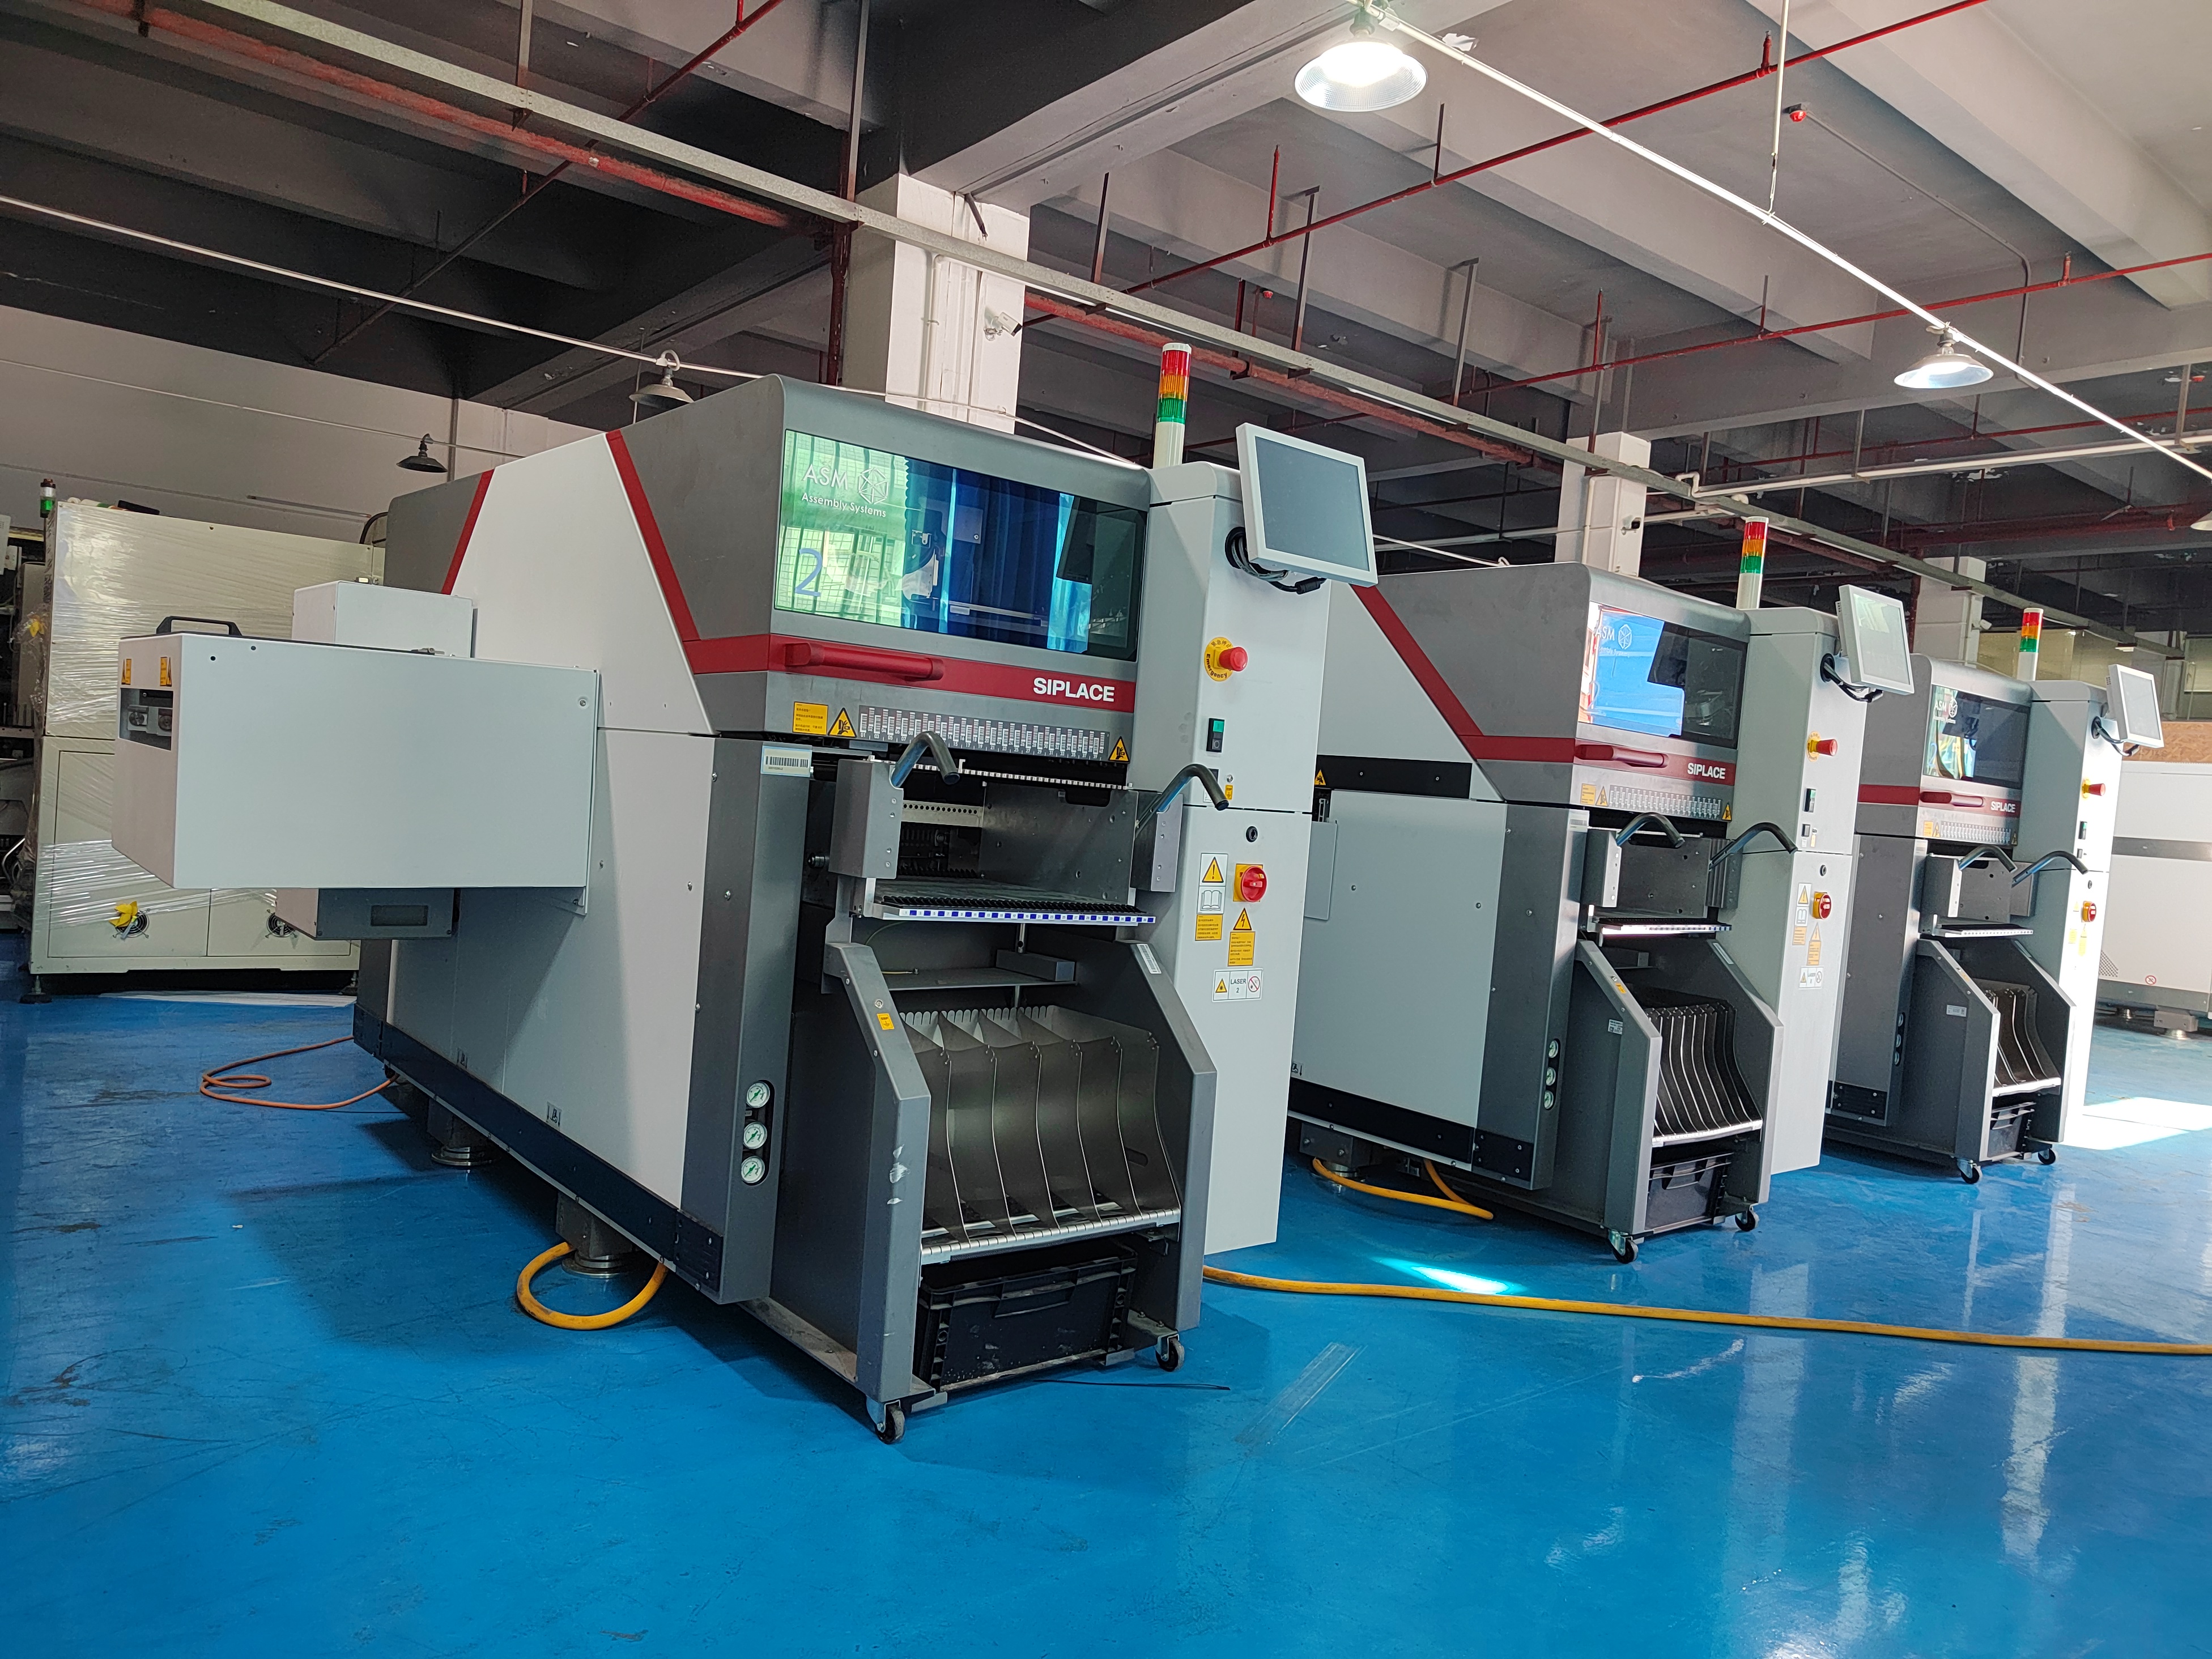 Siemens SIPLACE placement machines models